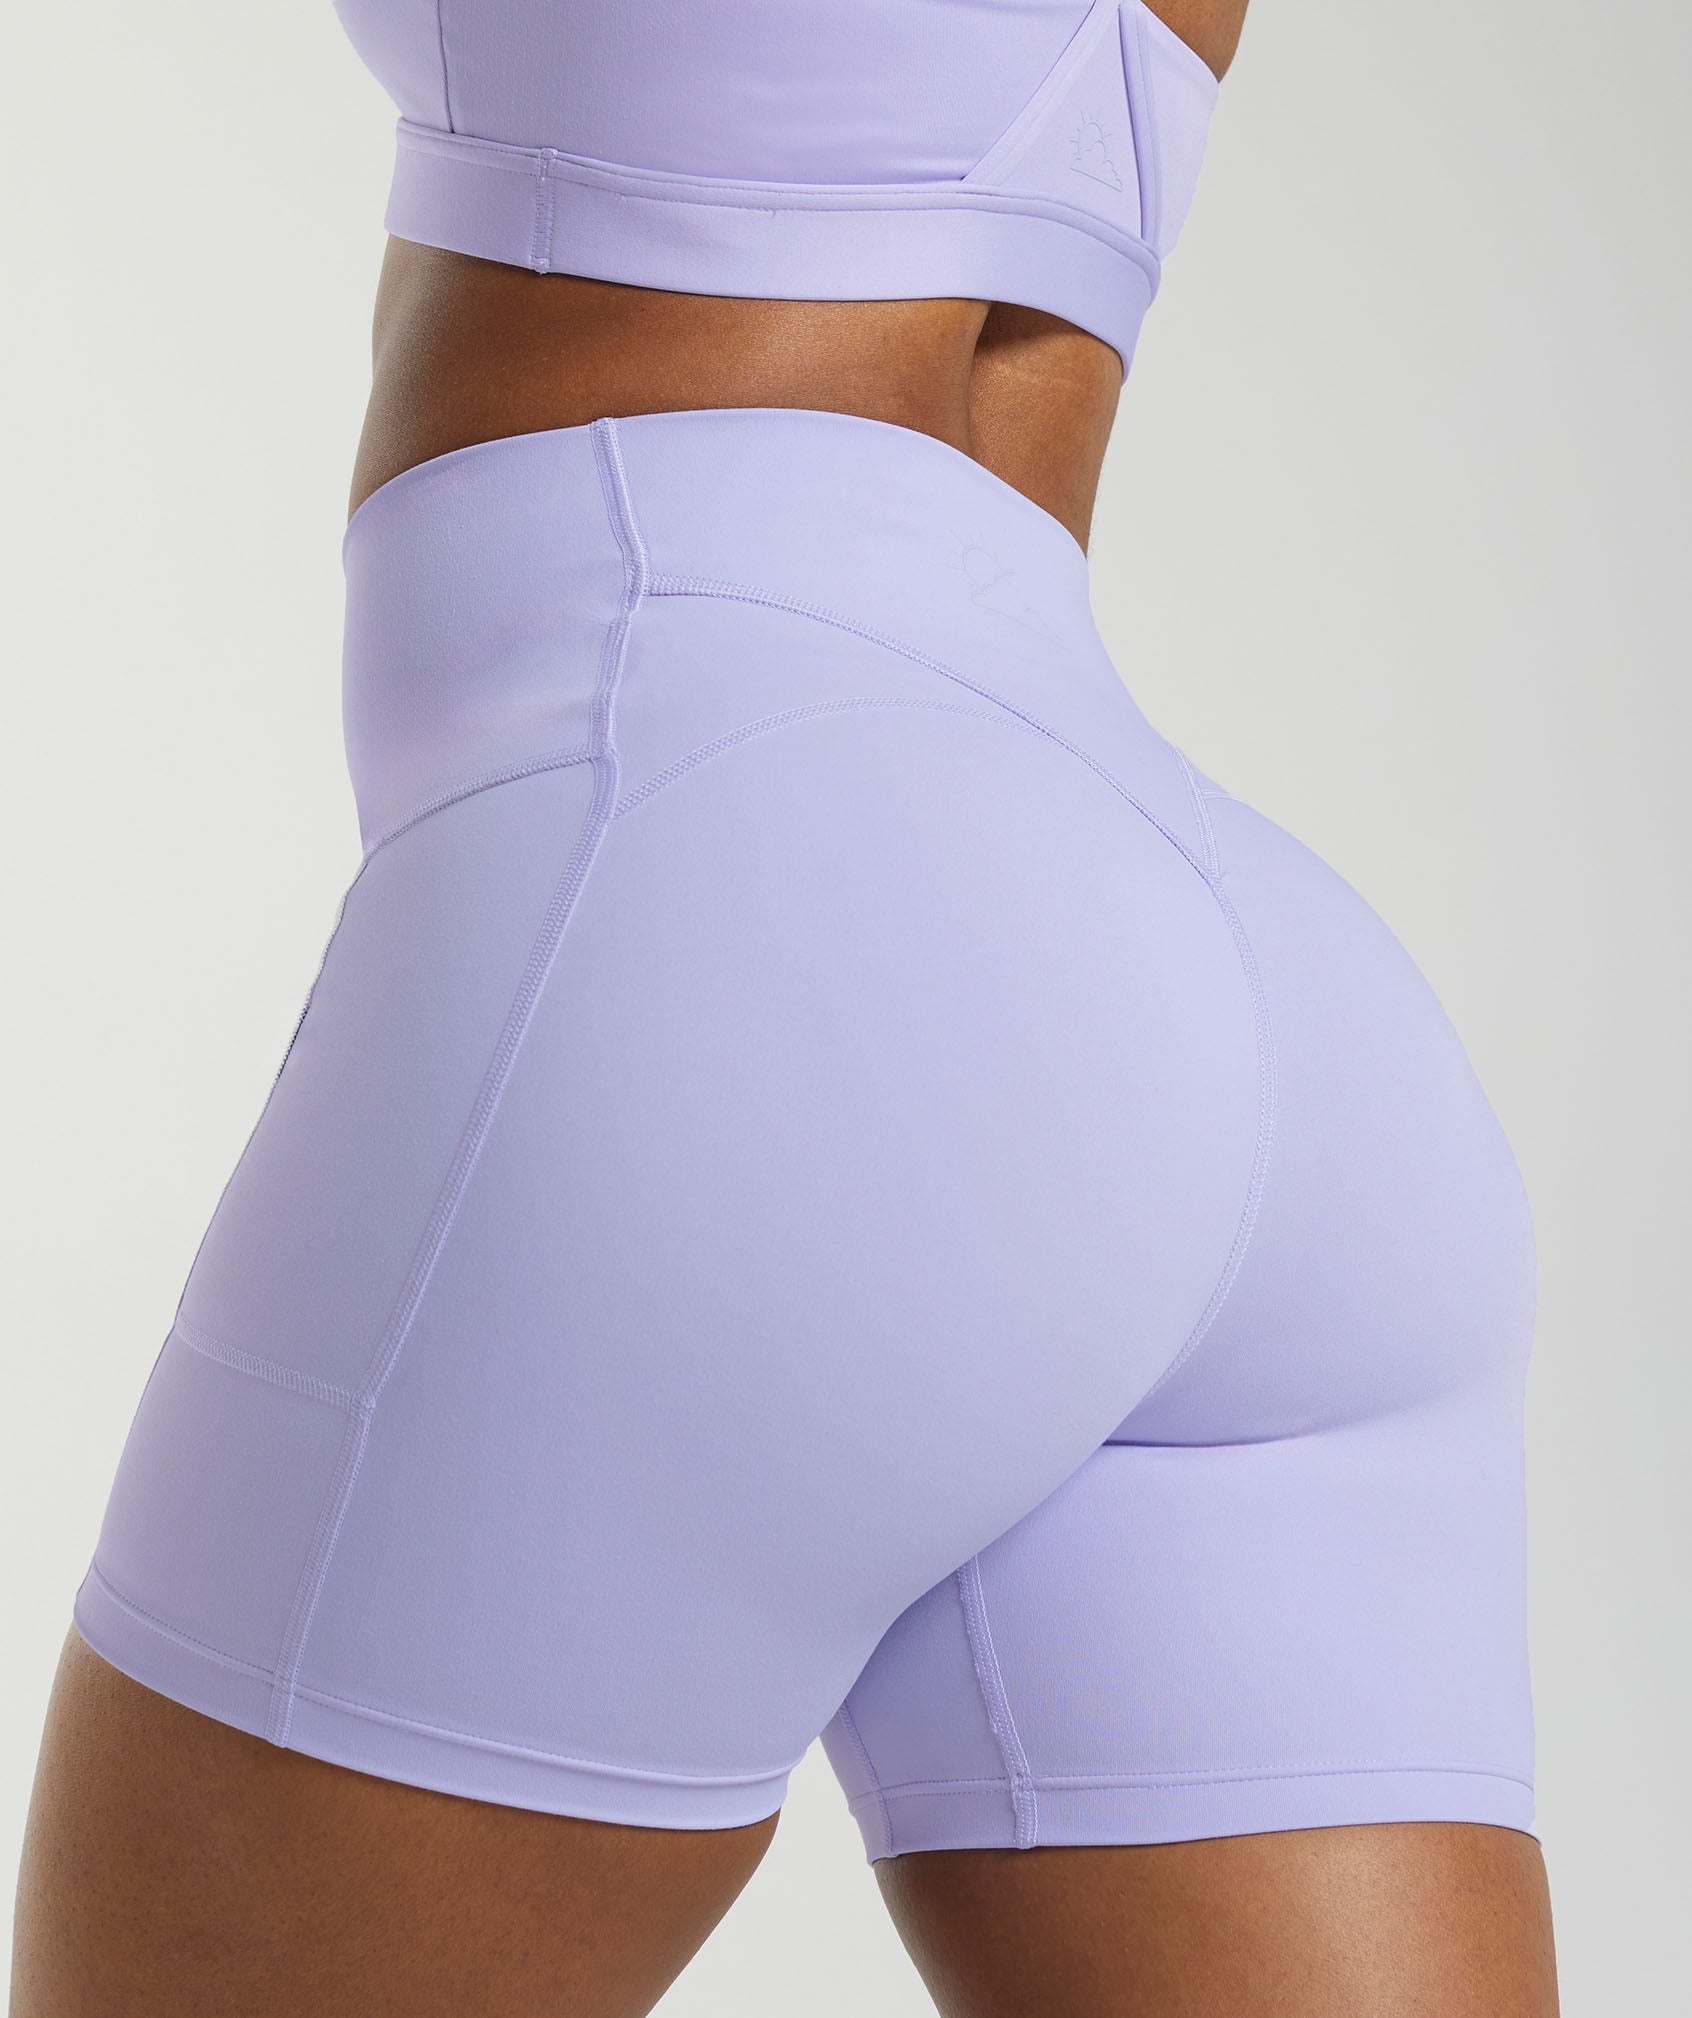 GS x Libby Shorts in Powdered Lilac - view 6